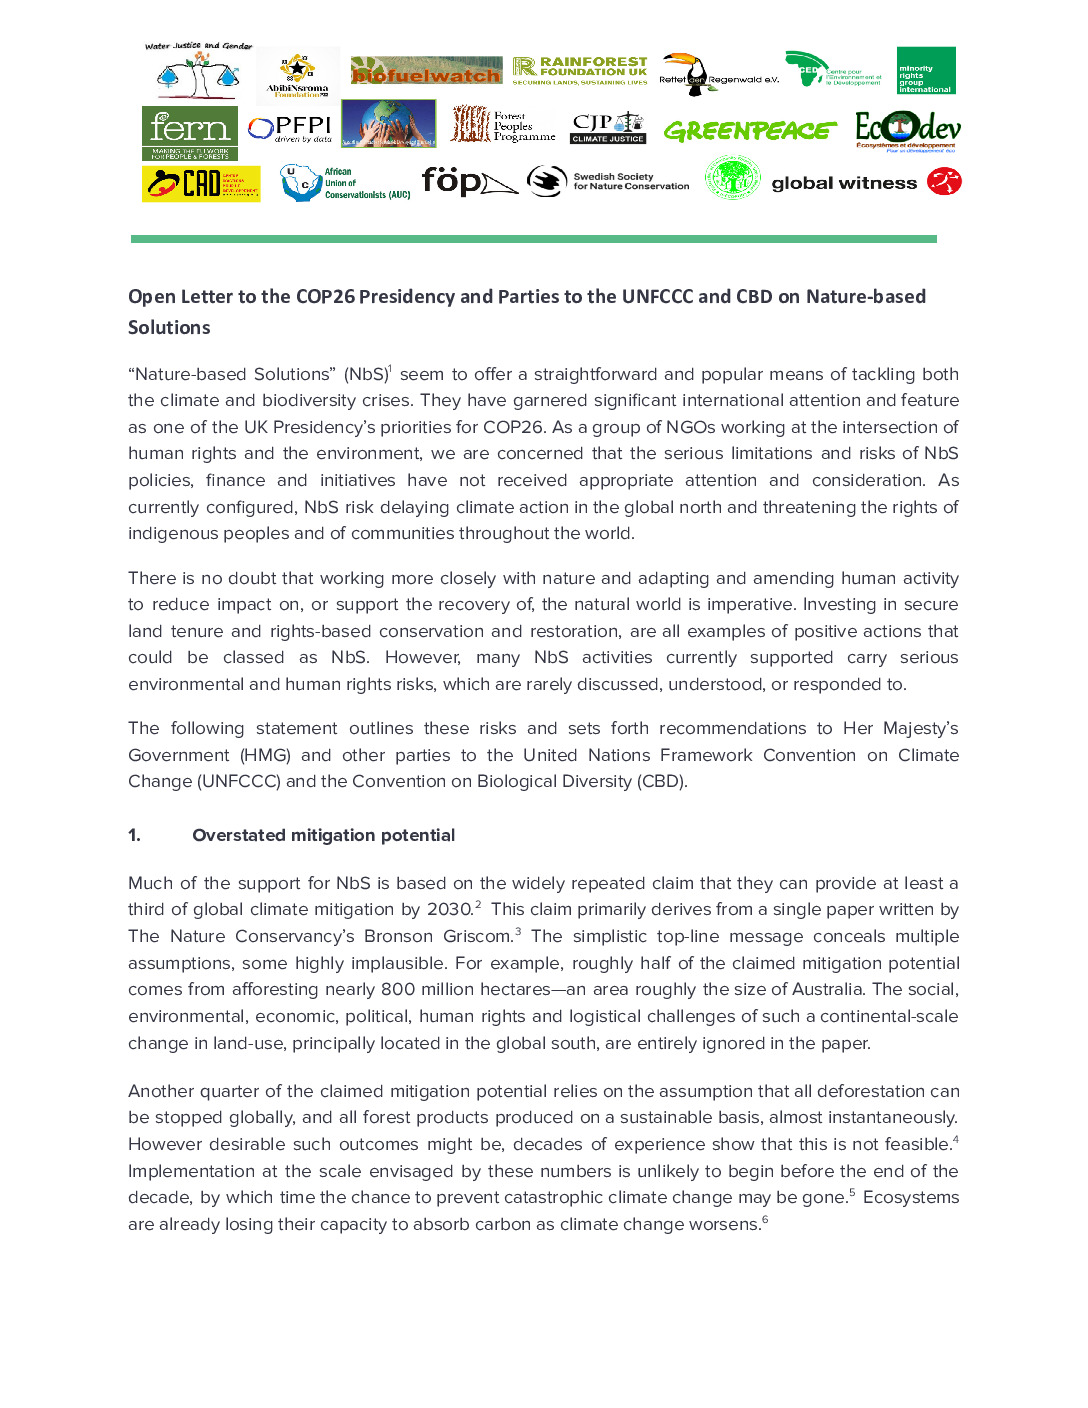 thumbnail of _media.ashx_eng-open-letter-to-the-cop26-presidency